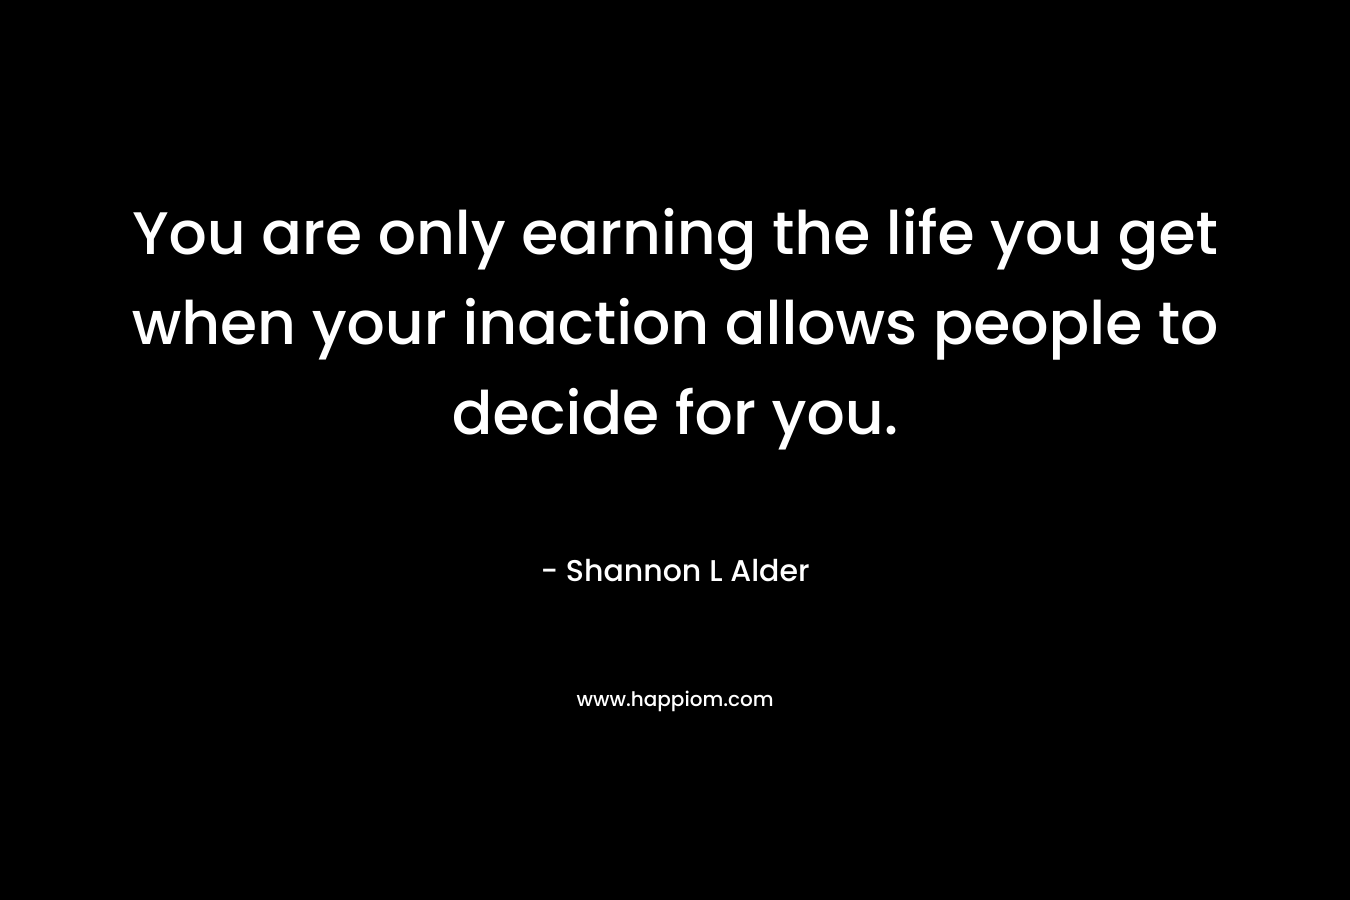 You are only earning the life you get when your inaction allows people to decide for you. – Shannon L Alder